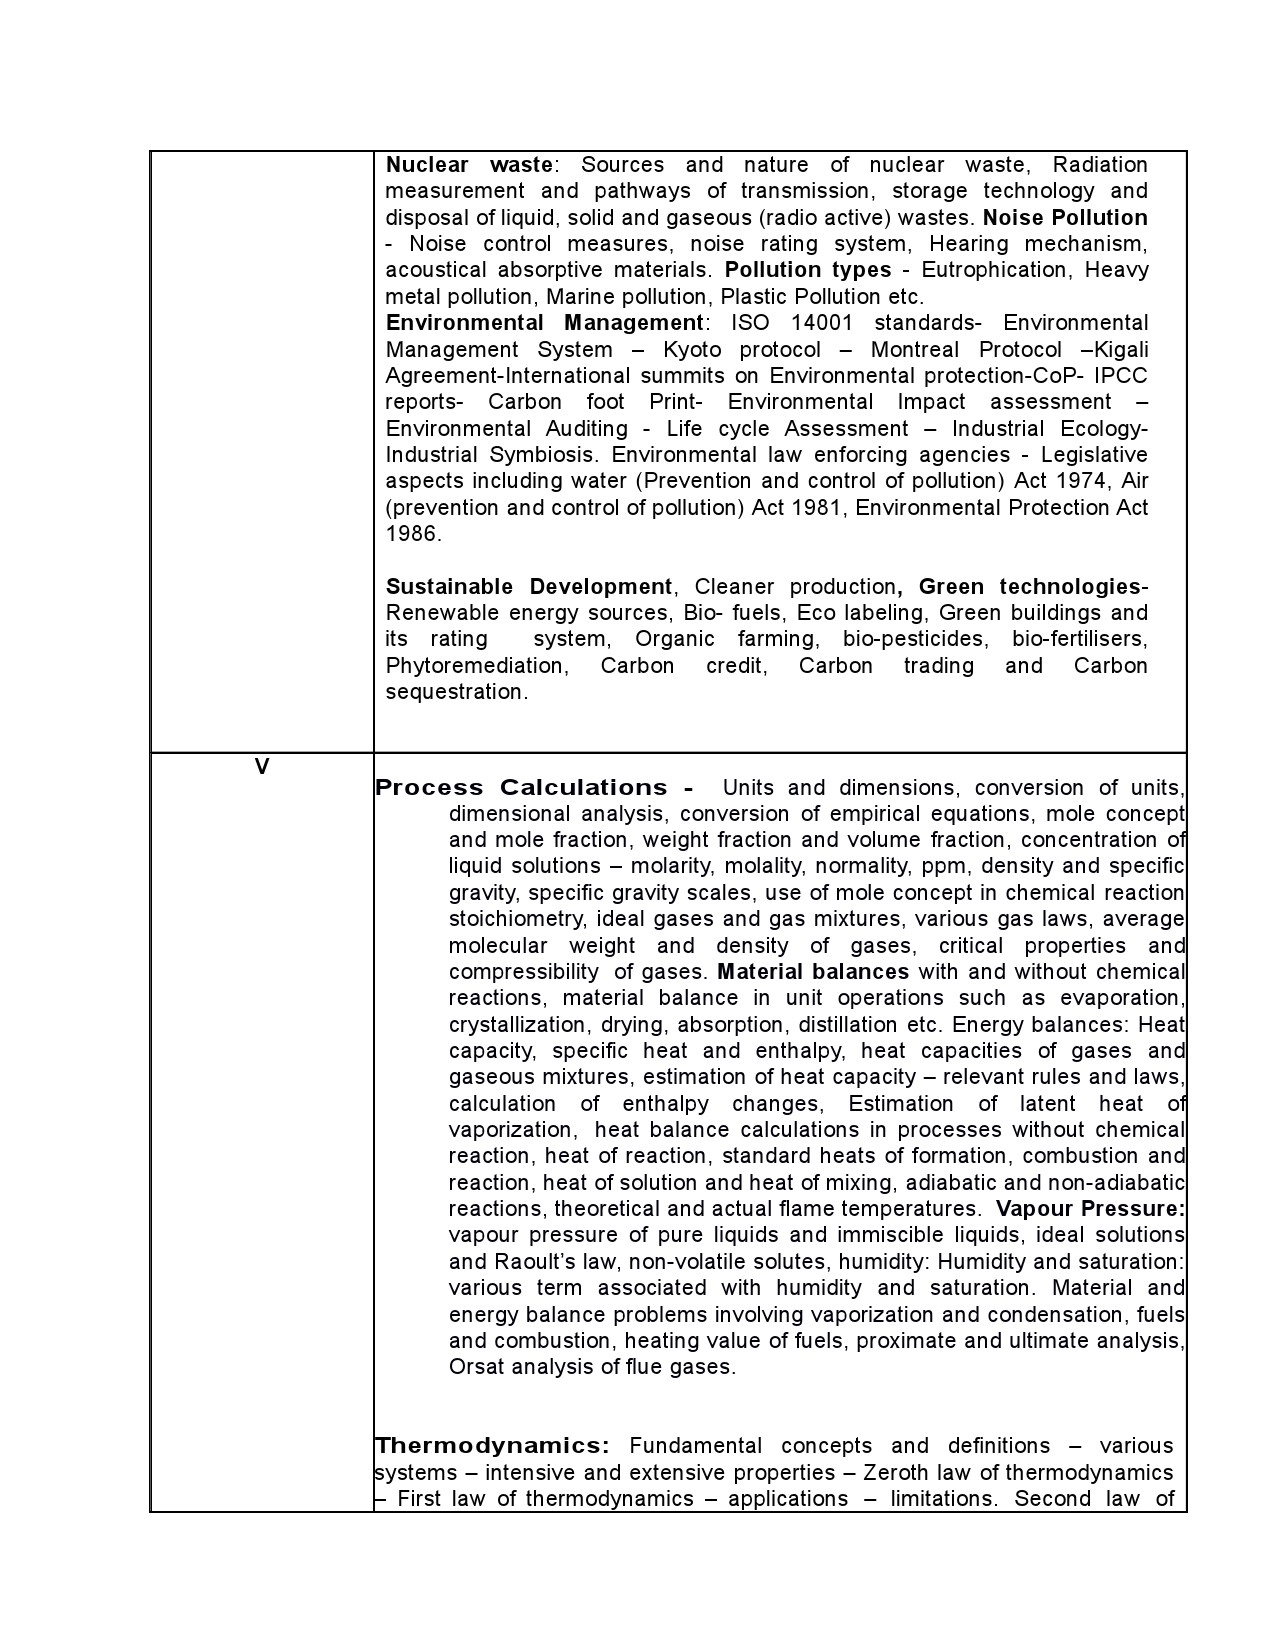 KPSC SYLLABUS FOR ASSISTANT ENGINEER POLLUTION CONTROL BOARD - Notification Image 5